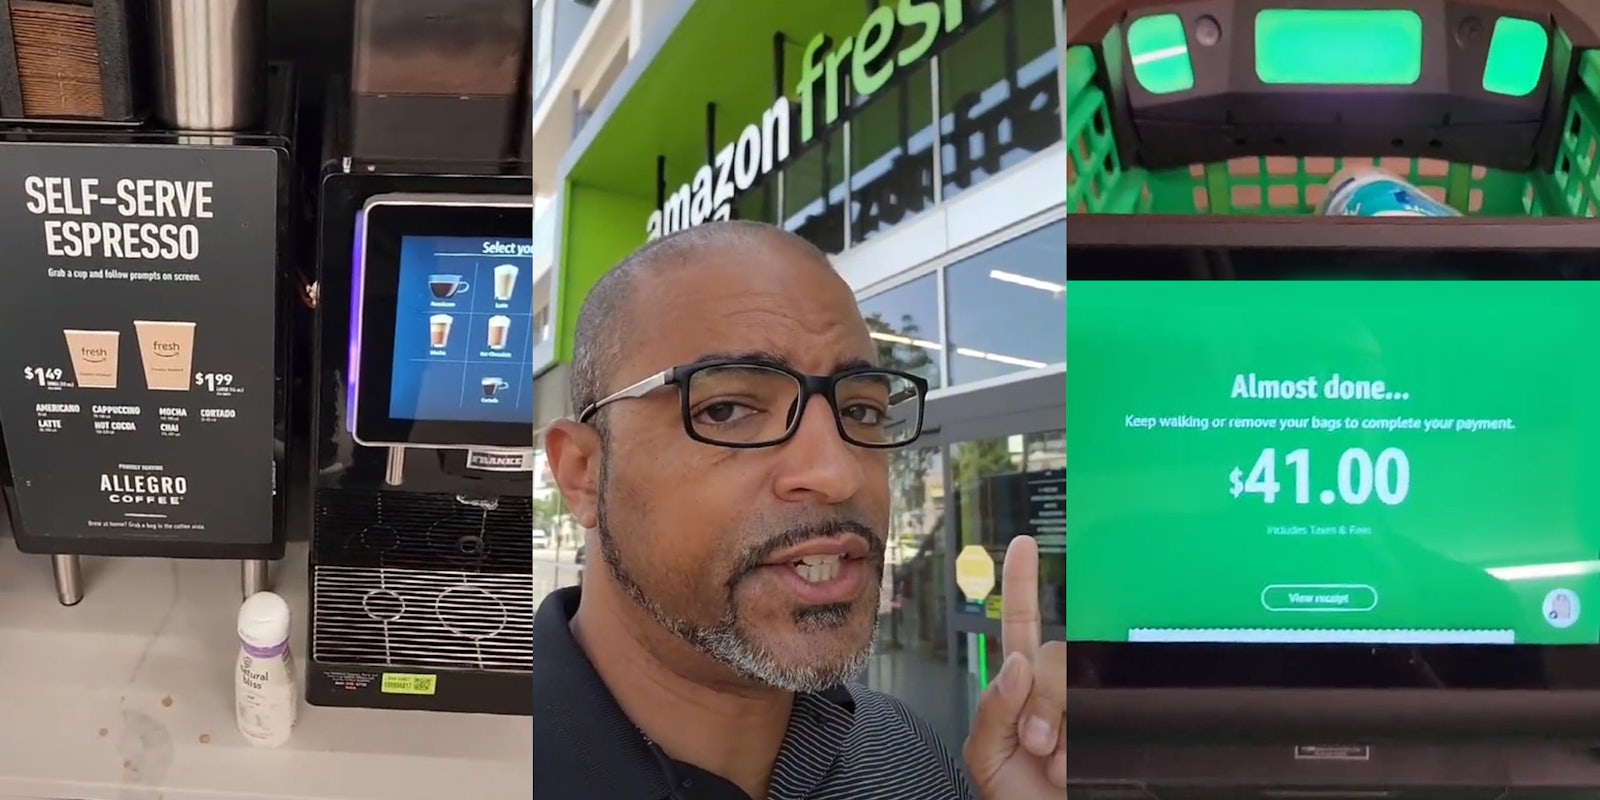 Self serve coffee machine inside of Amazon Fresh store (l) Man pointing to Amazon Fresh sign (c) Amazon Fresh shopping cart screen processing payment (r)